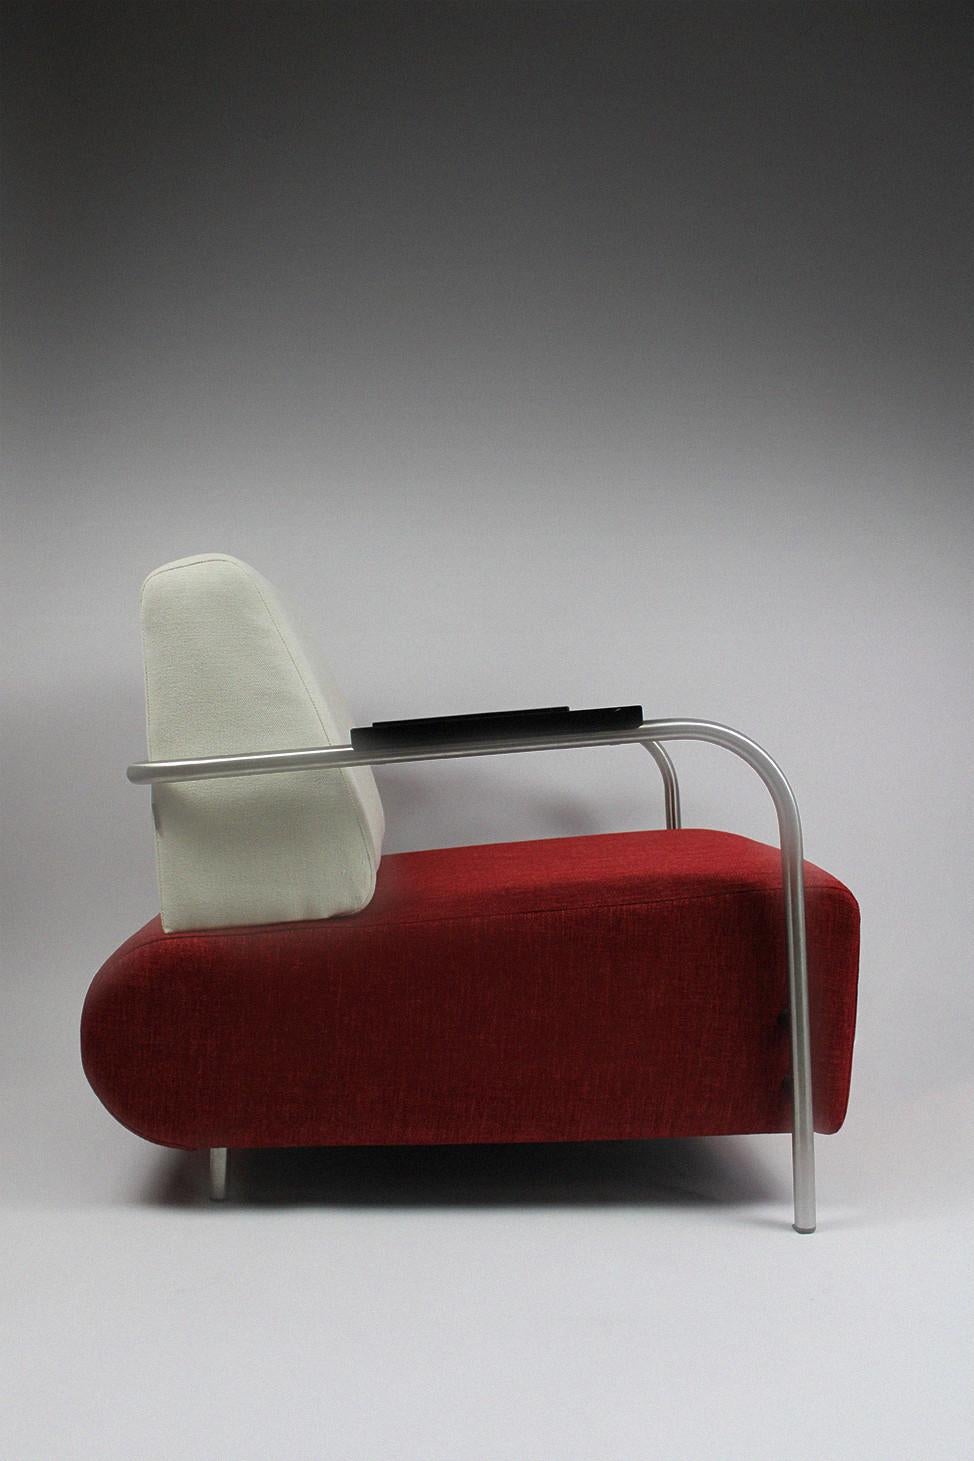 These innovative lounge chairs by Jamé, a recognized Dutch furniture company known for their strength in form and style, which is something that brought them to the forefront as a brand tremendously and which they were able to accomplish immediately